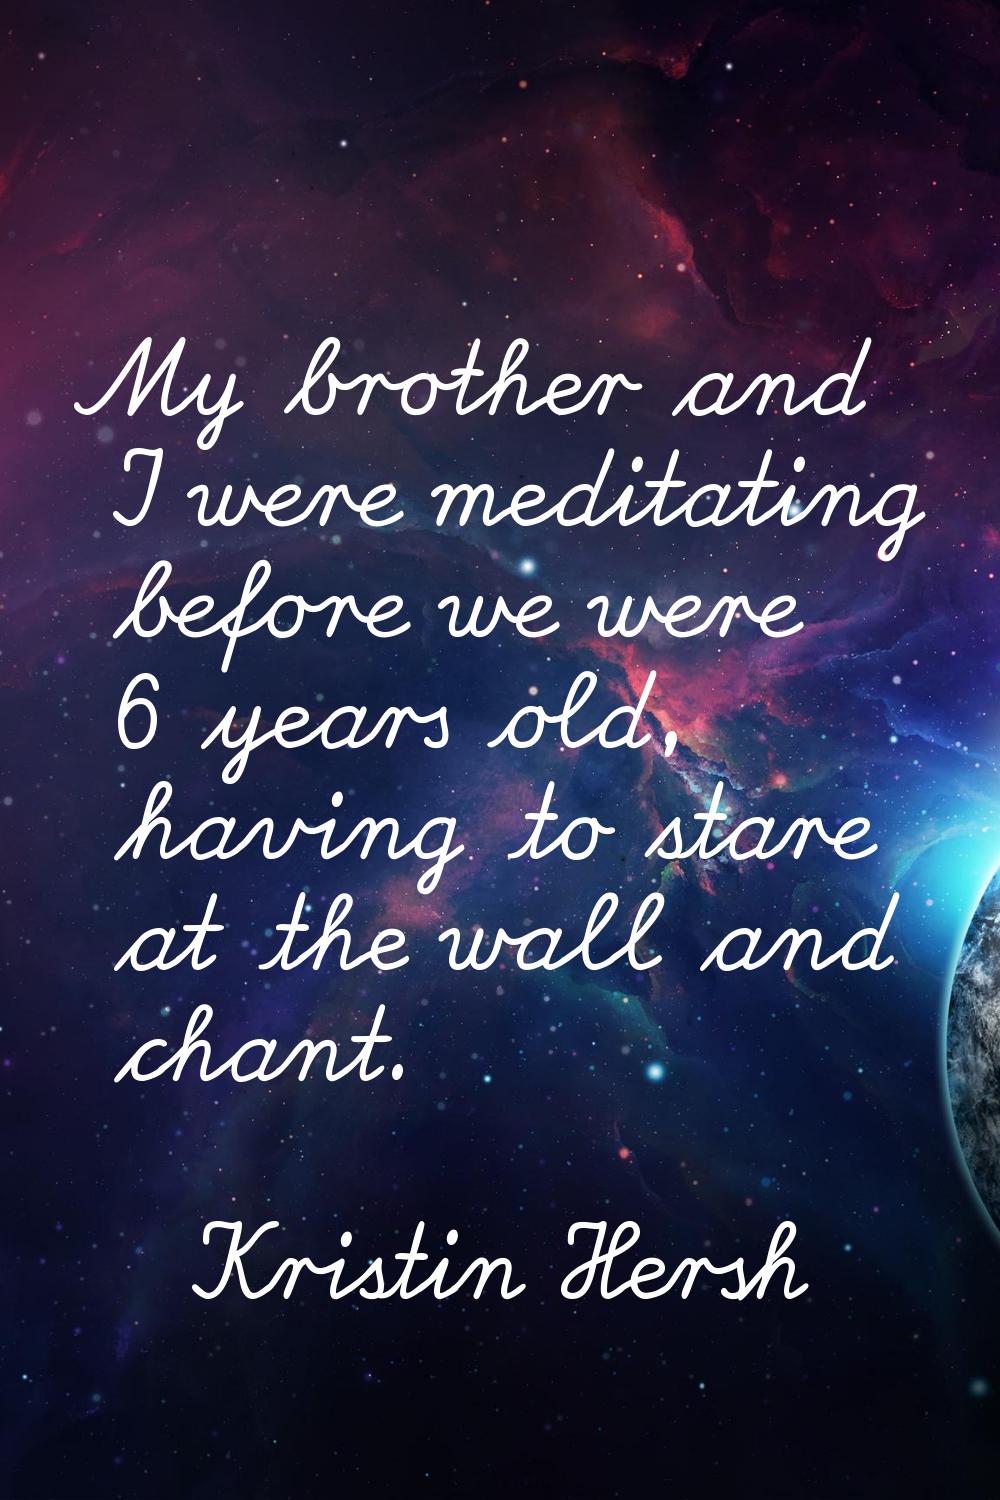 My brother and I were meditating before we were 6 years old, having to stare at the wall and chant.